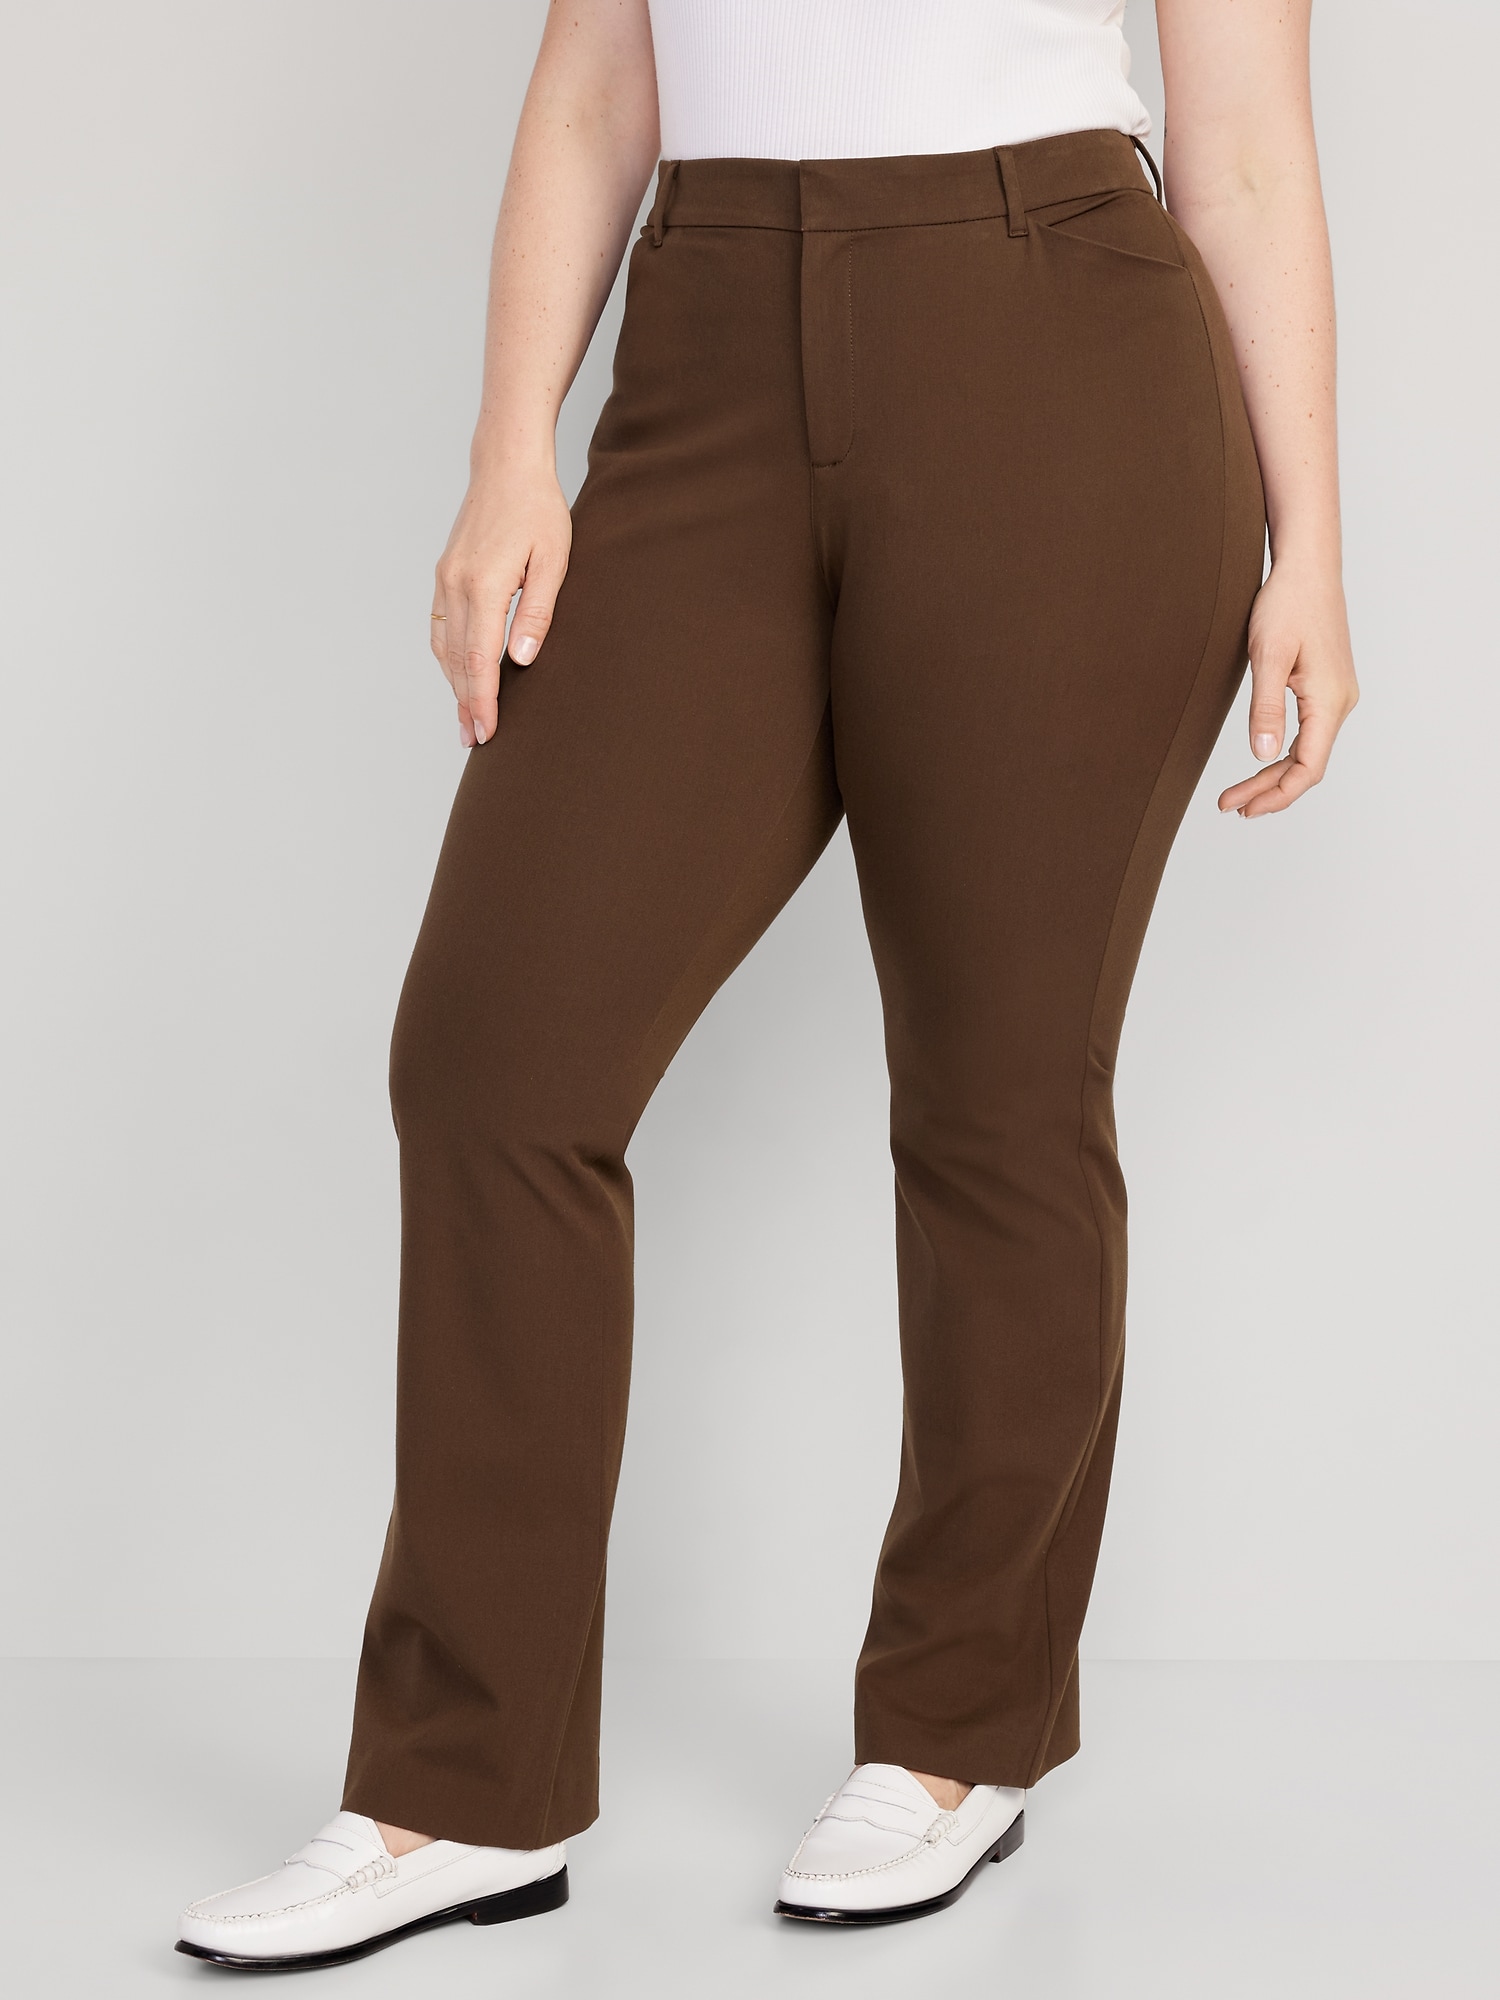 High-Waisted Pixie Flare Pants | Old Navy